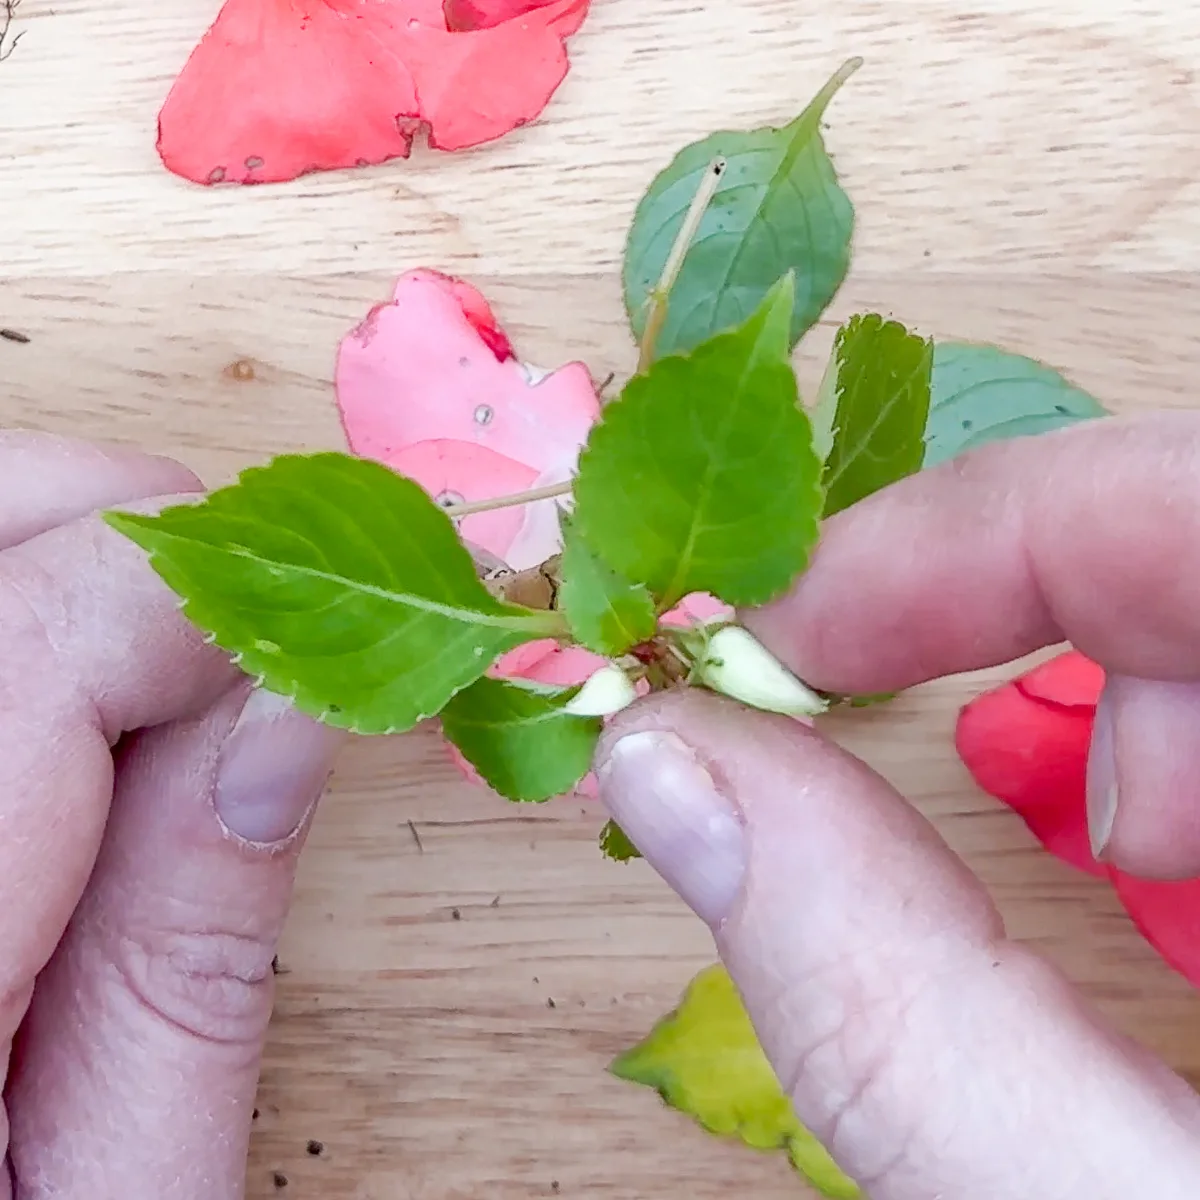 pinching off flower buds from impatiens cutting